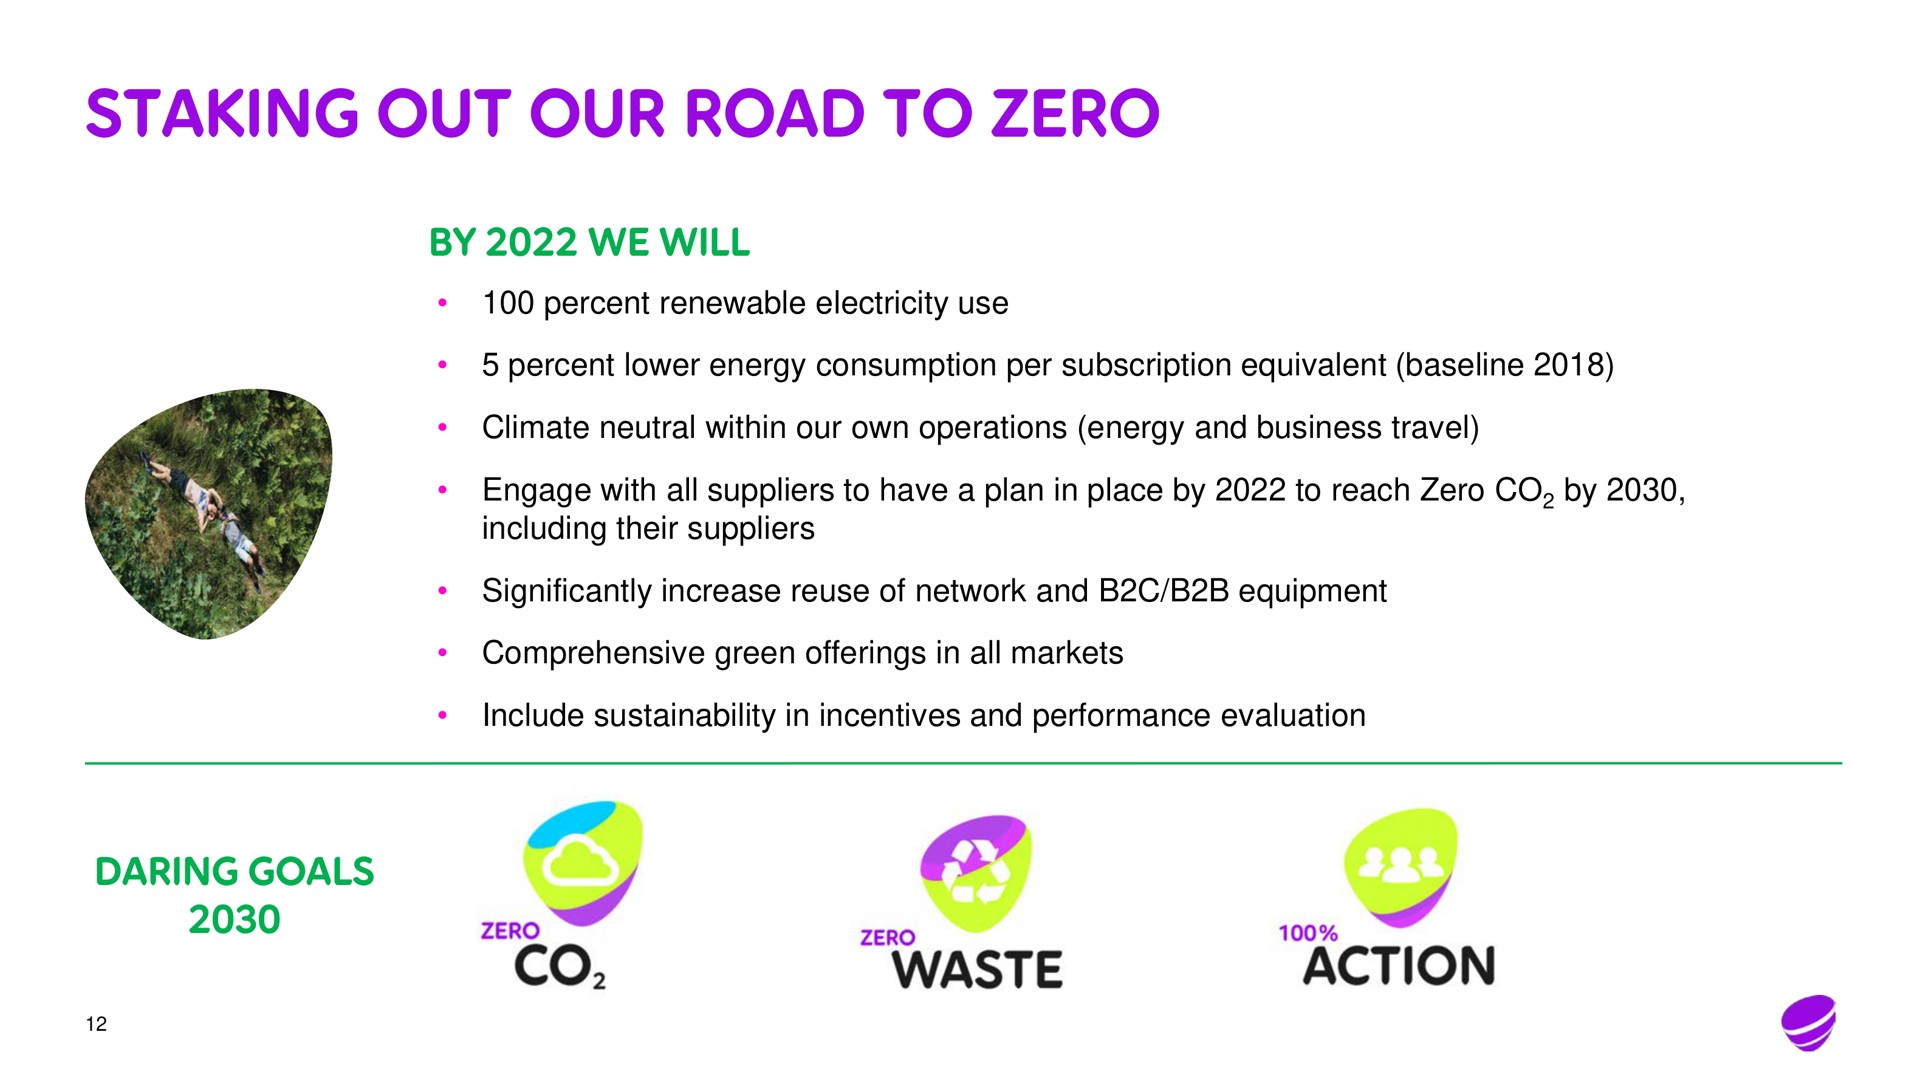 staking out our road to zero waste action | Telia Company